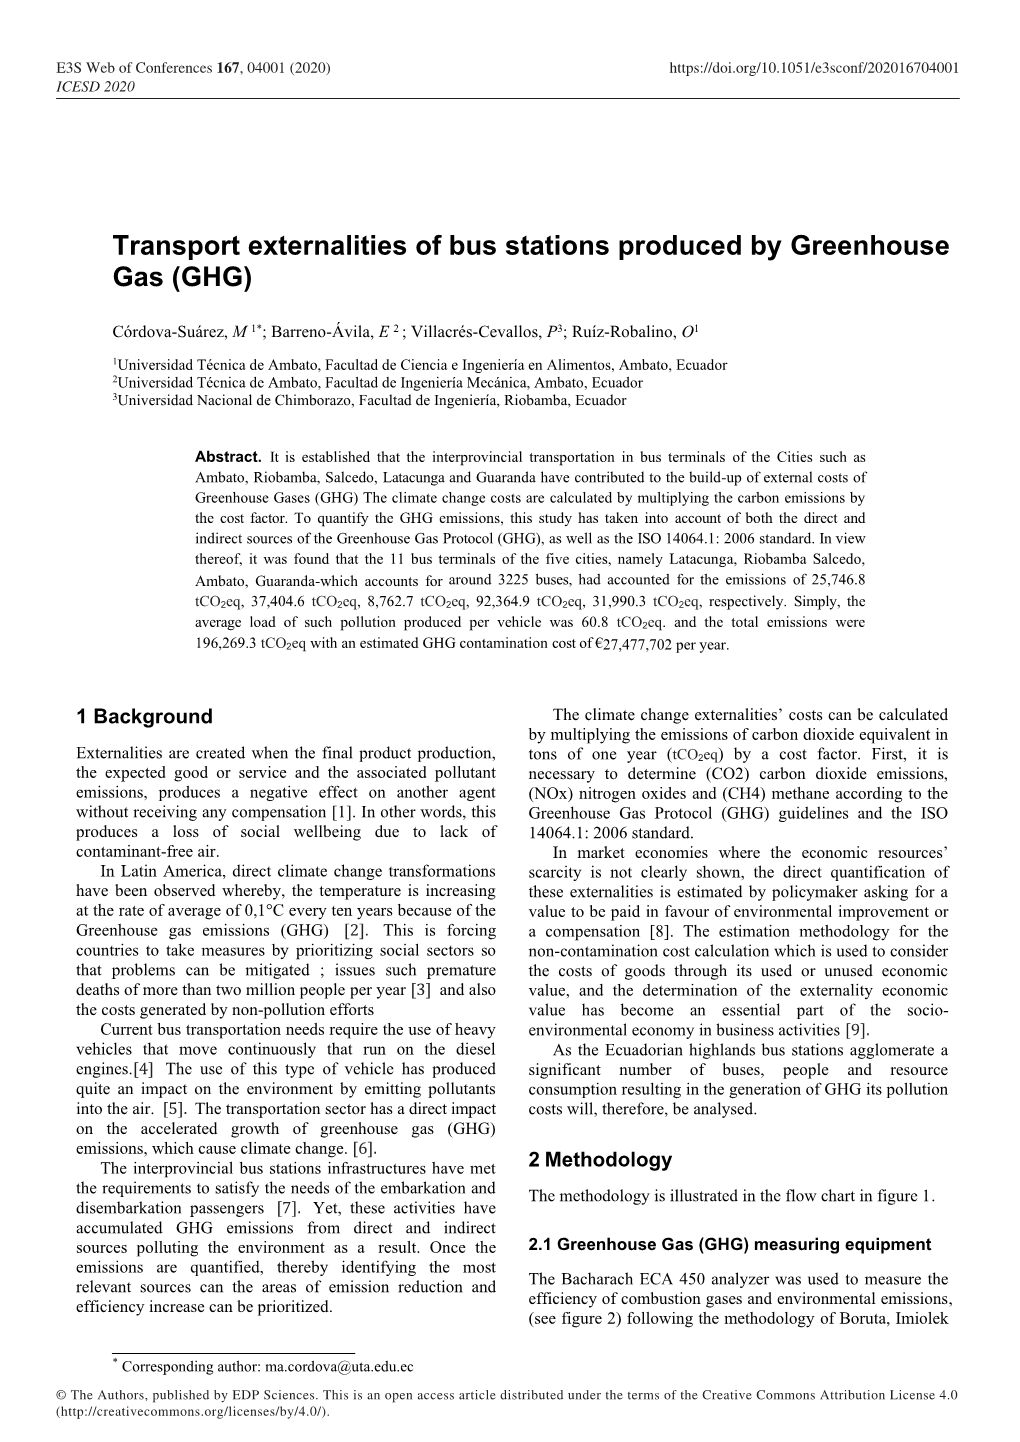 Transport Externalities of Bus Stations Produced by Greenhouse Gas (GHG)